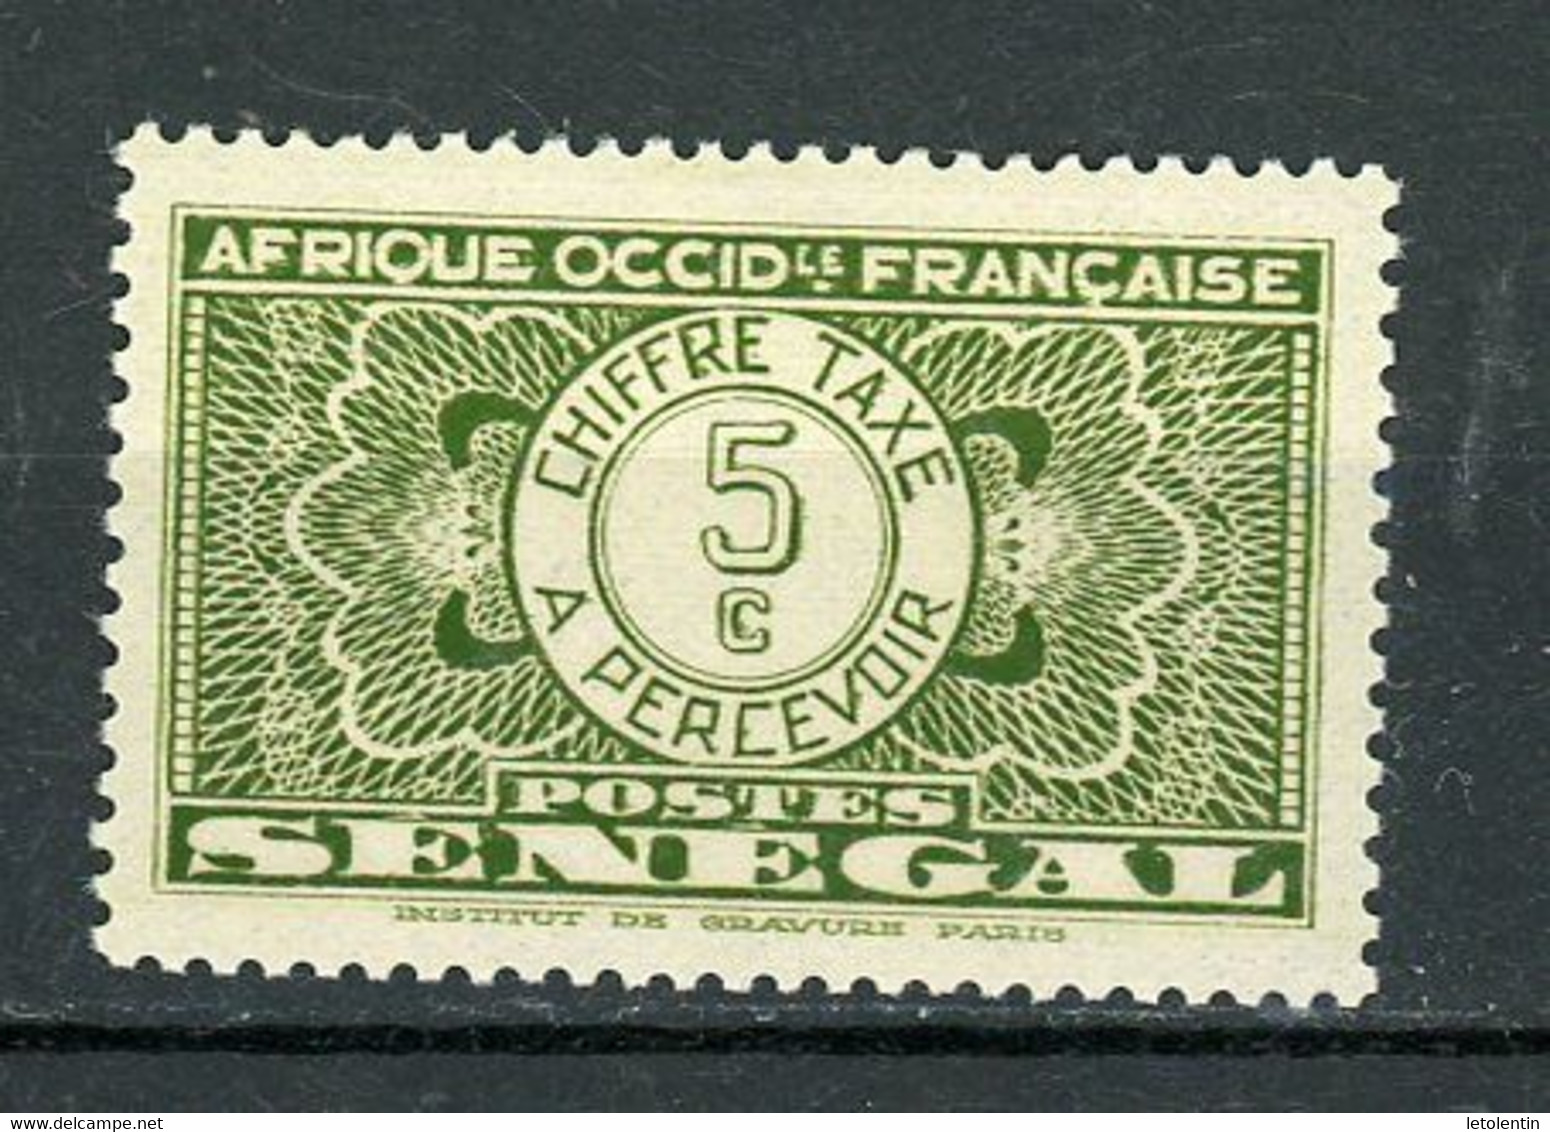 SENEGAL (RF) - TIMBRE TAXE N° Yt 22 ** - Postage Due